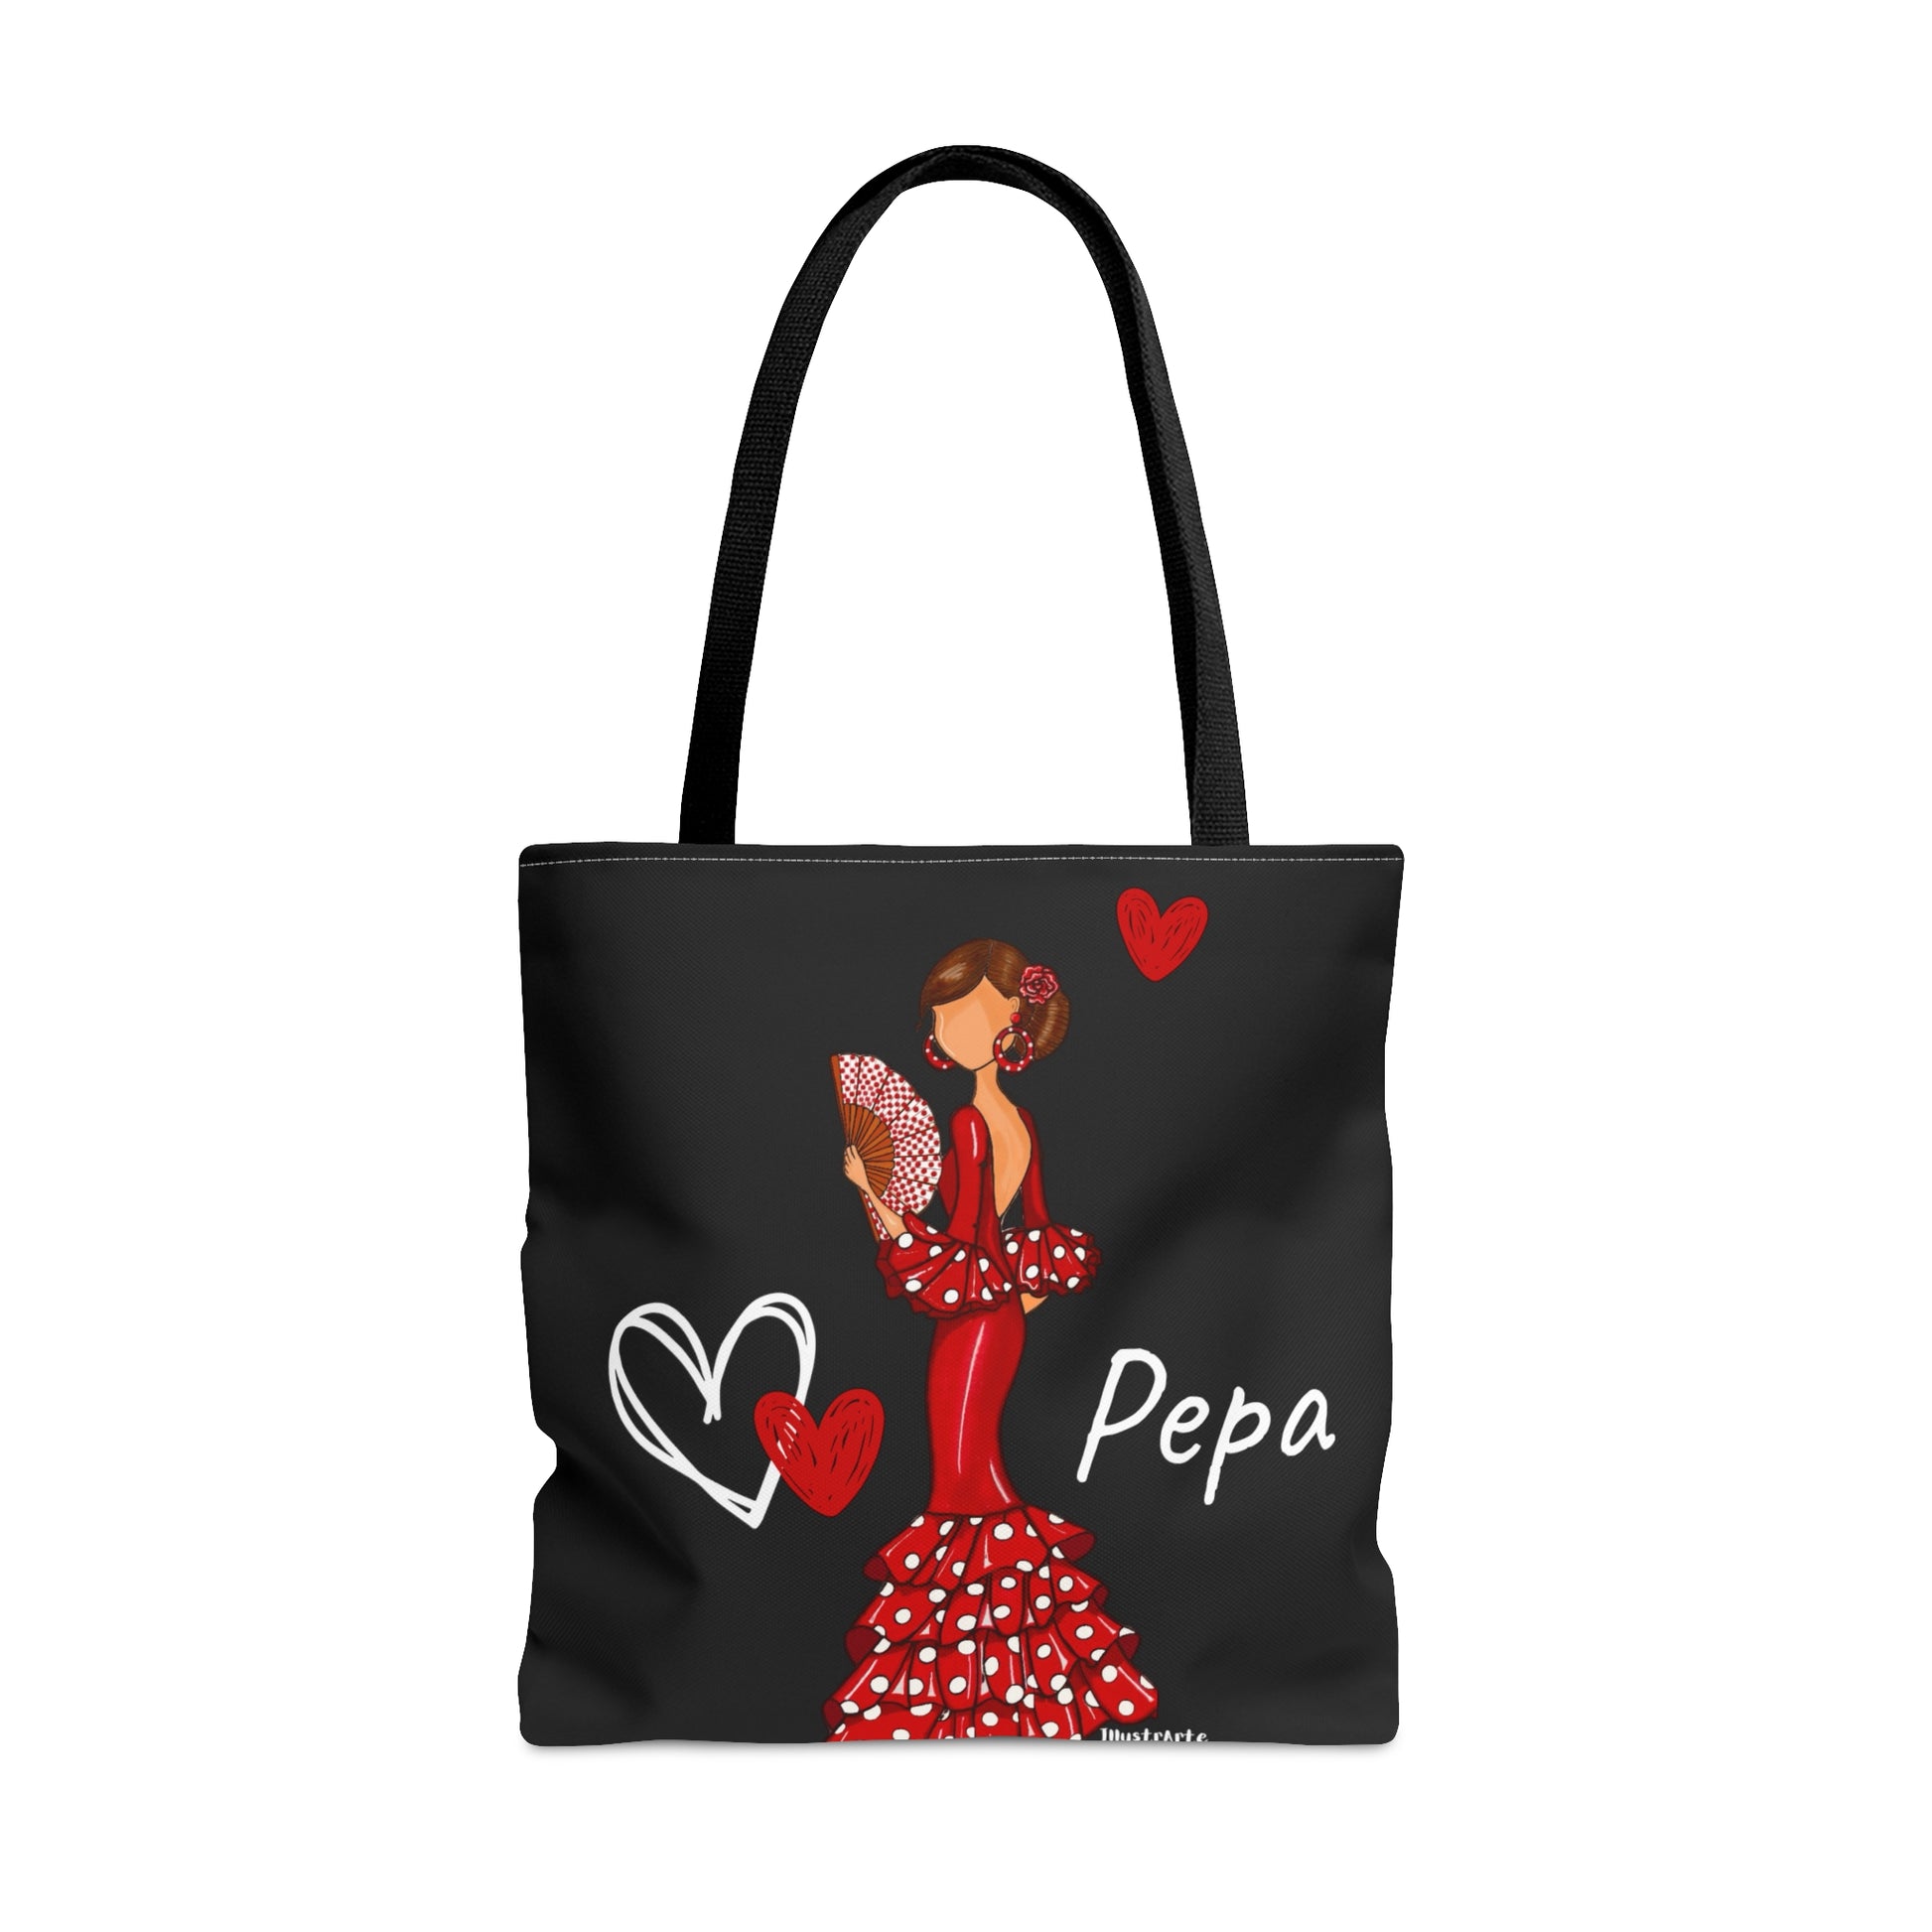 a black tote bag with a woman in a polka dot dress